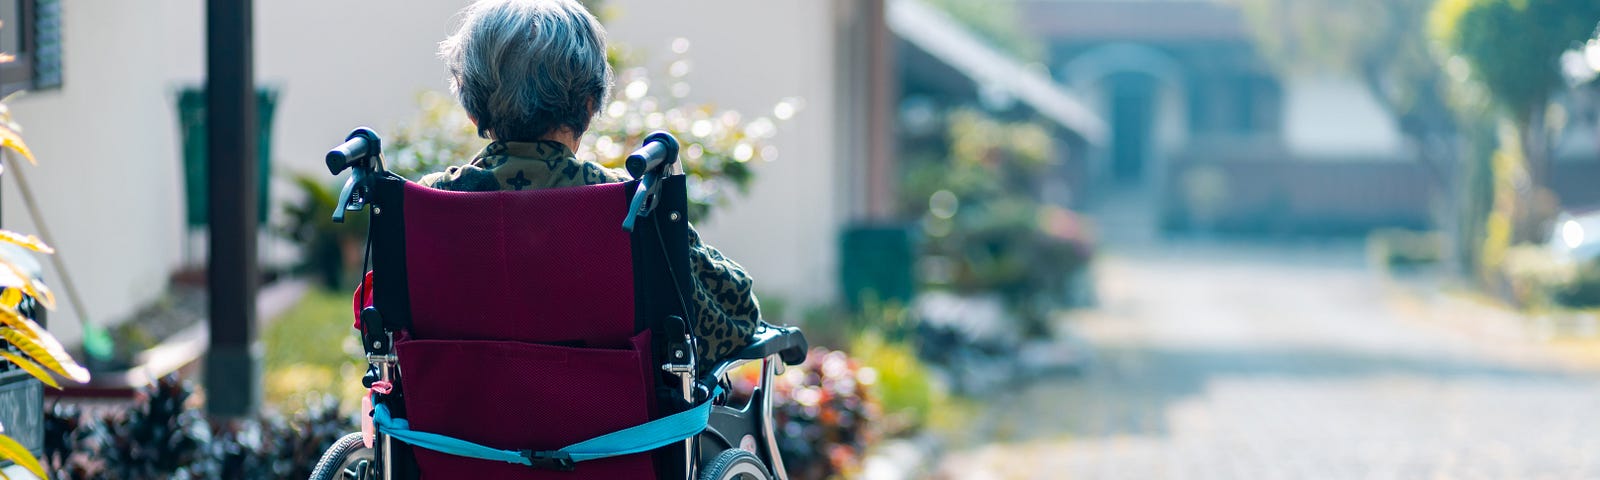 A woman in a wheelchair on a brick path. Her back to the camera